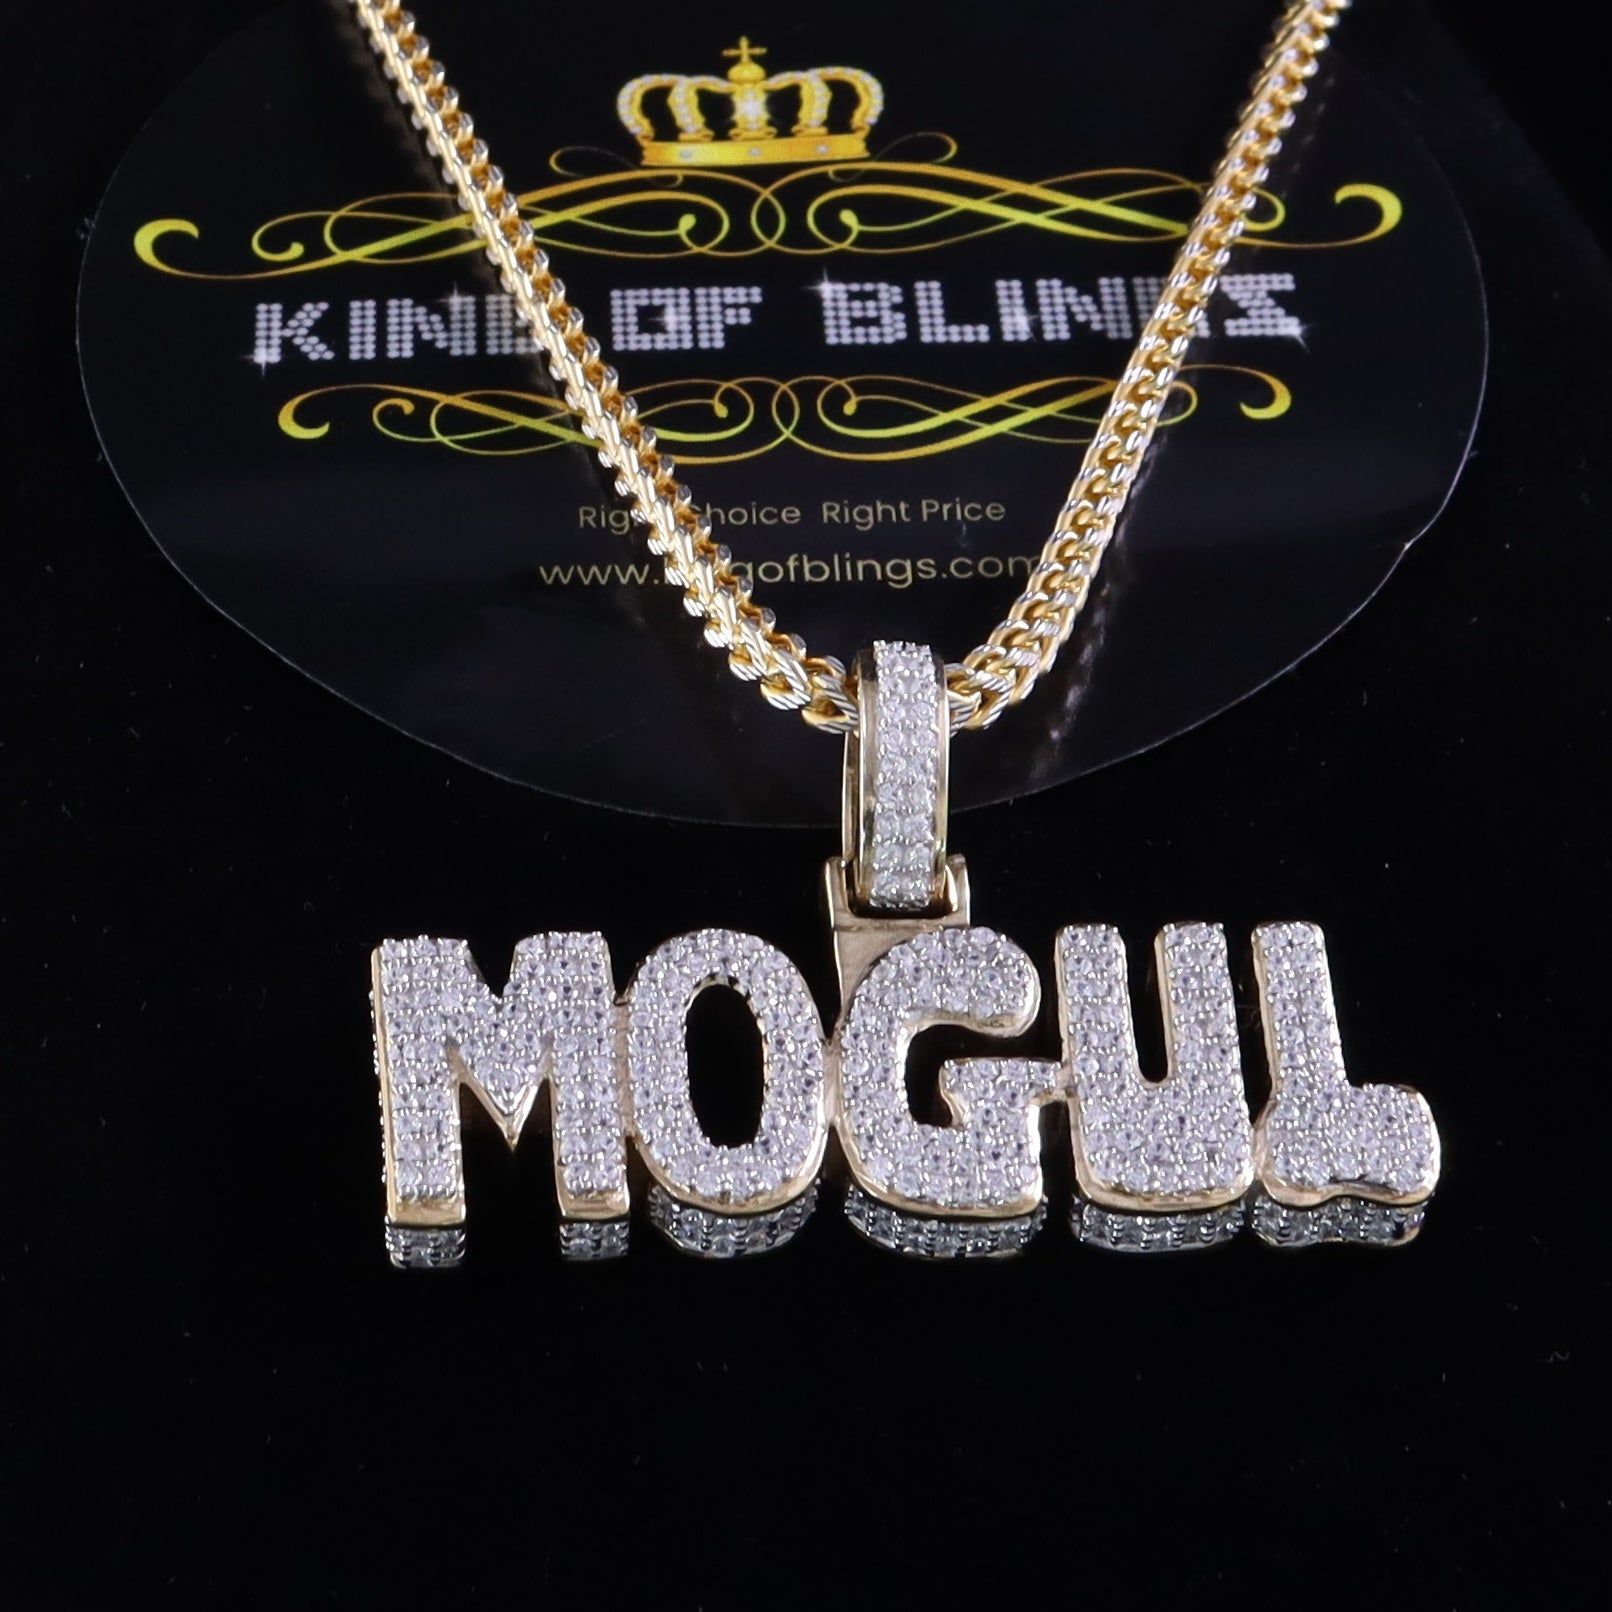 King Of Bling's King of Bling's Yellow Sterling Silver Mogul Pendant with 3.82ct Cubic Zirconia KING OF BLINGS